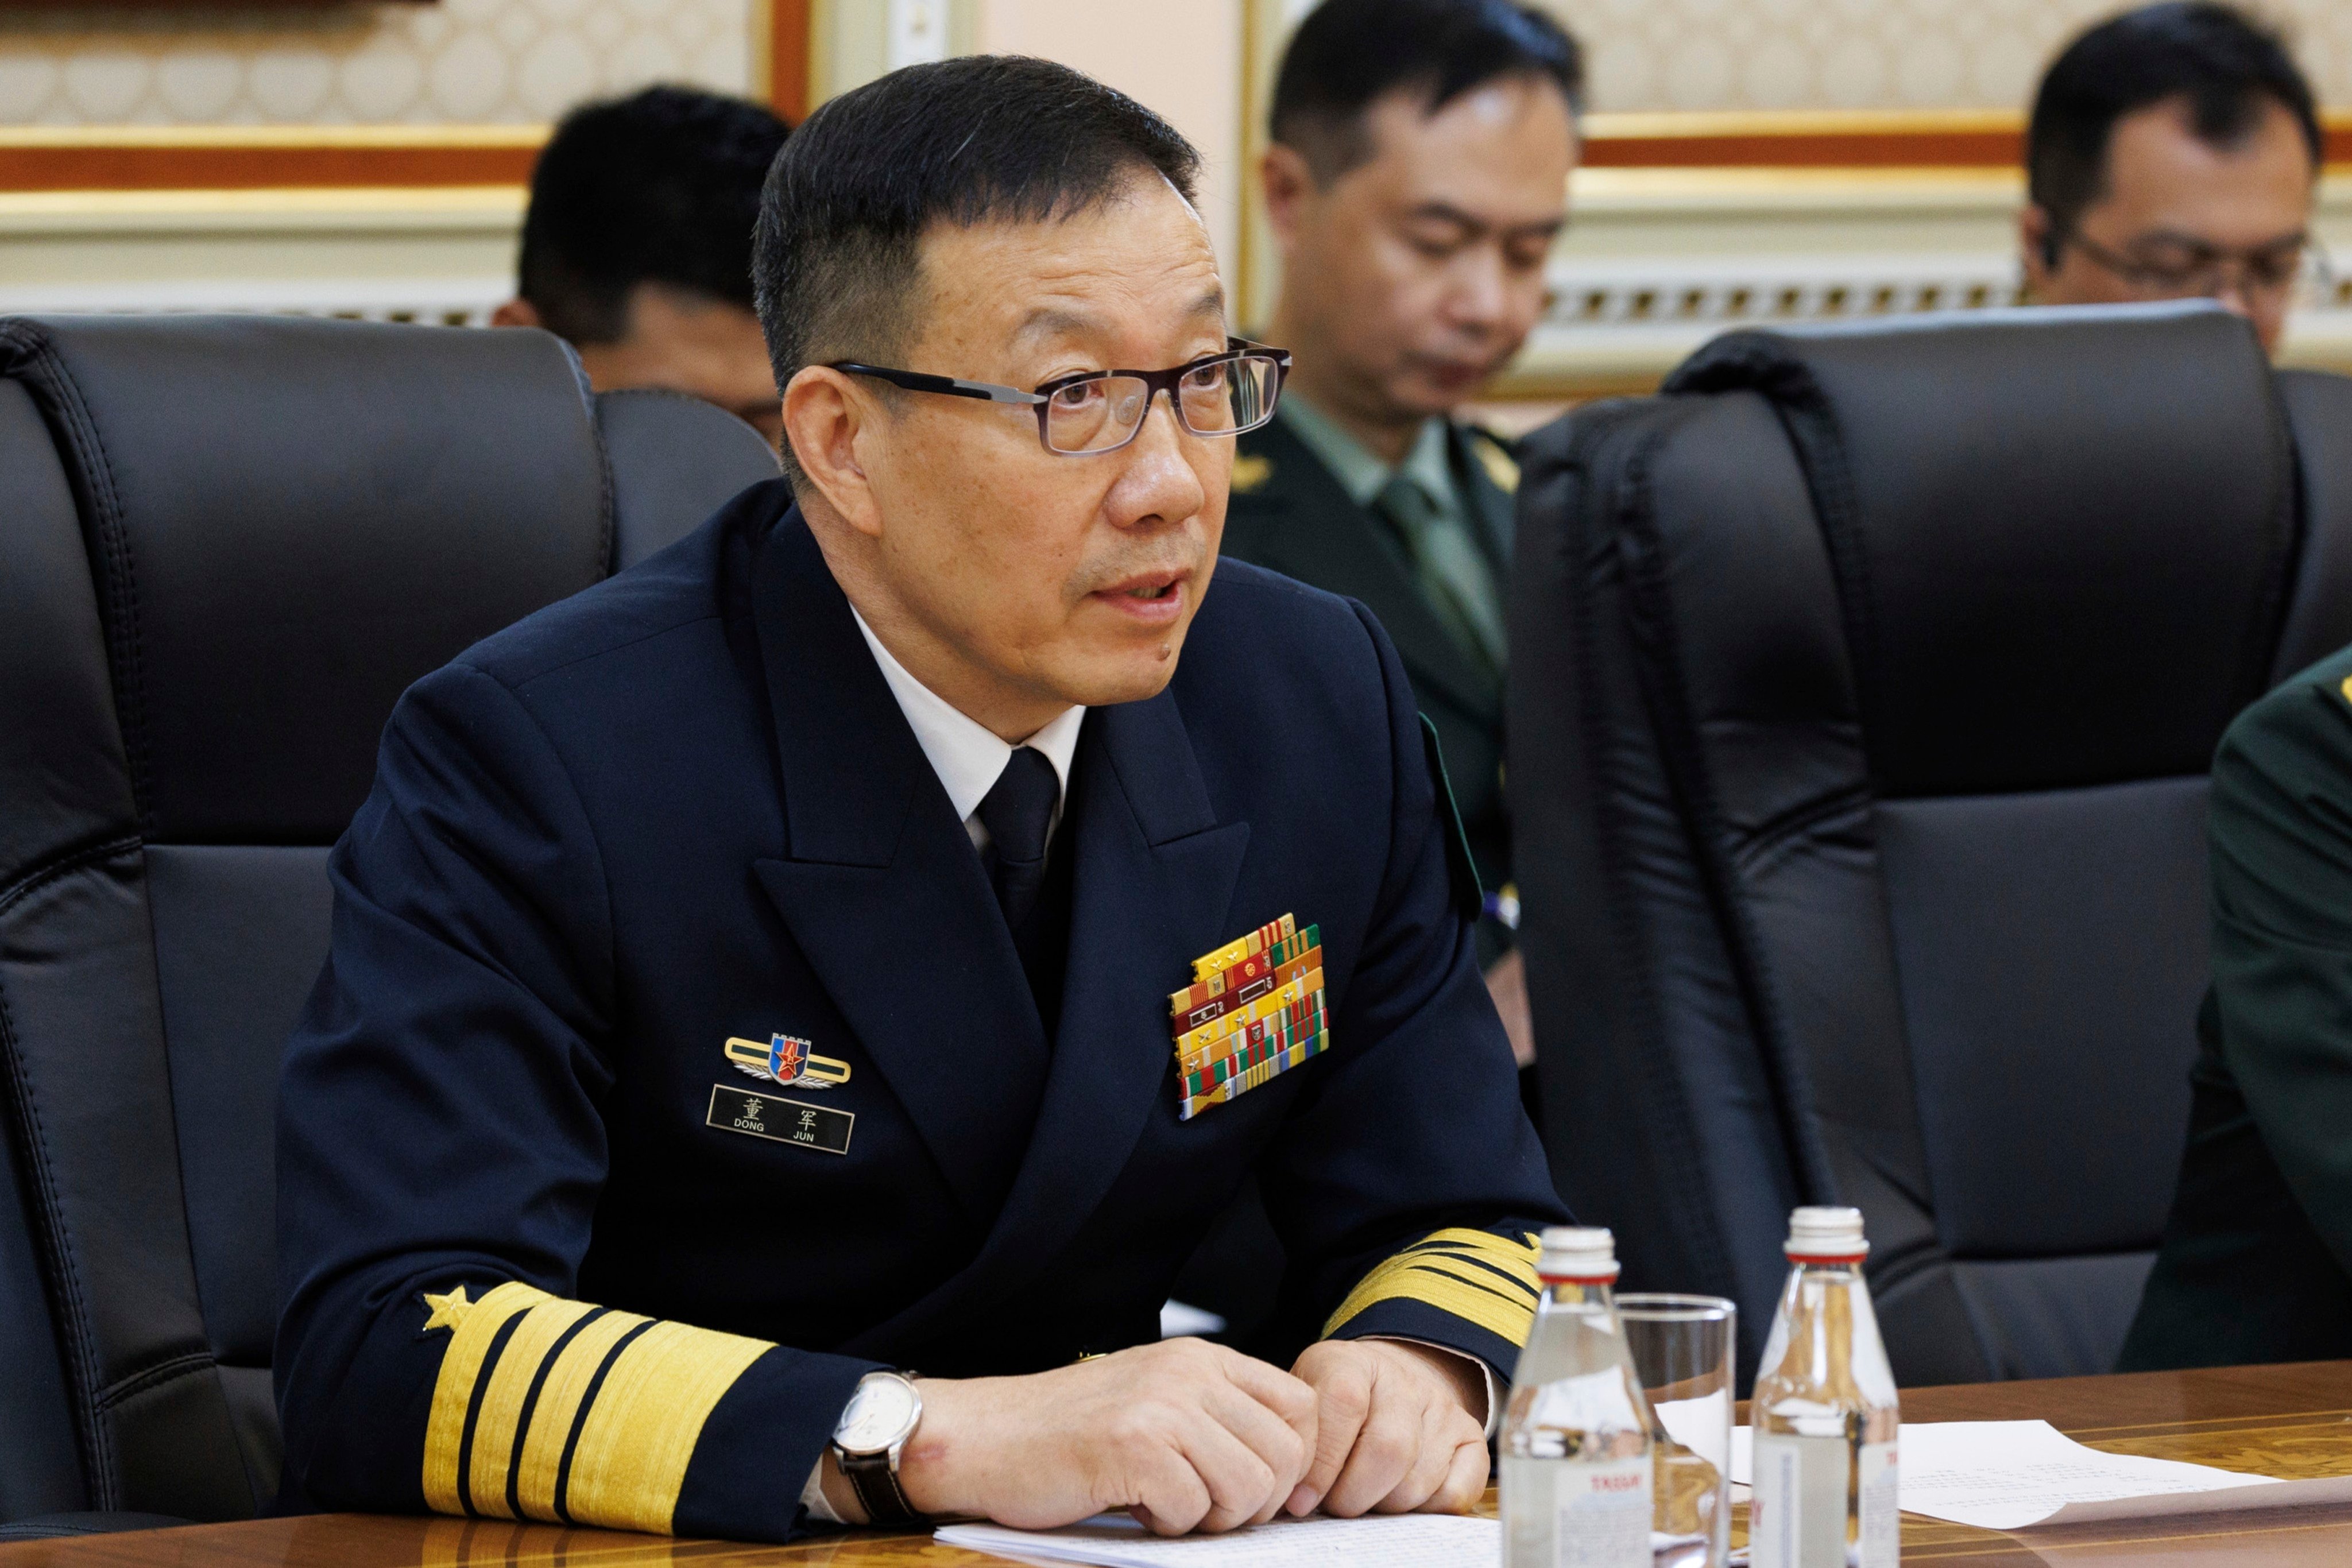 Dong Jun will attend this weekend’s Shangri-la Dialogue just days after Beijing conducted large-scale military drills around Taiwan. Photo: AP